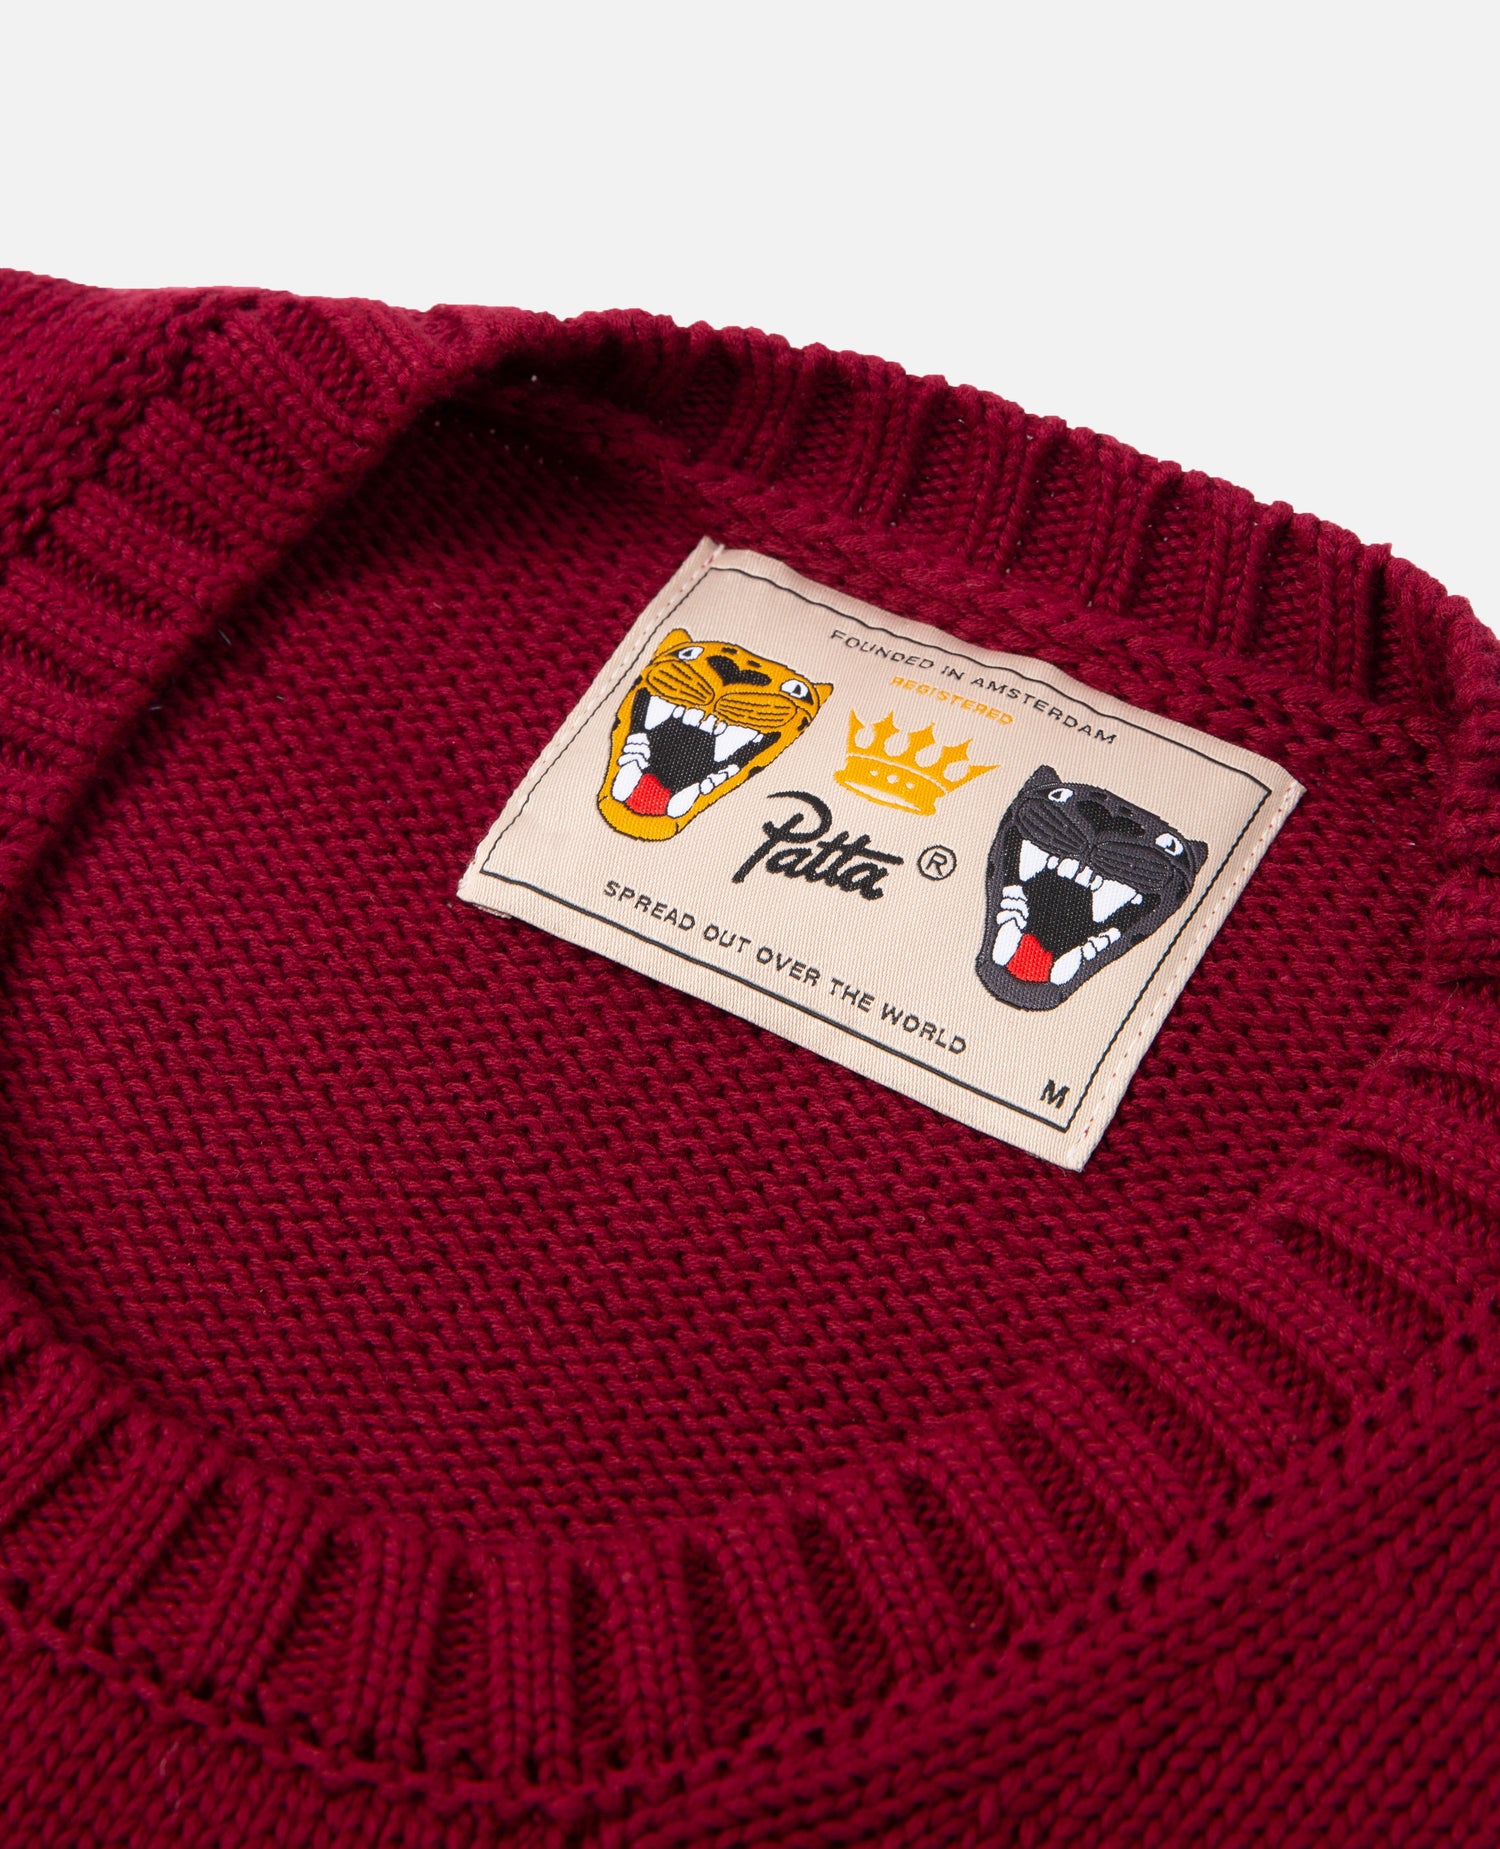 Patta University Knitted Sweater (Oxblood Red)